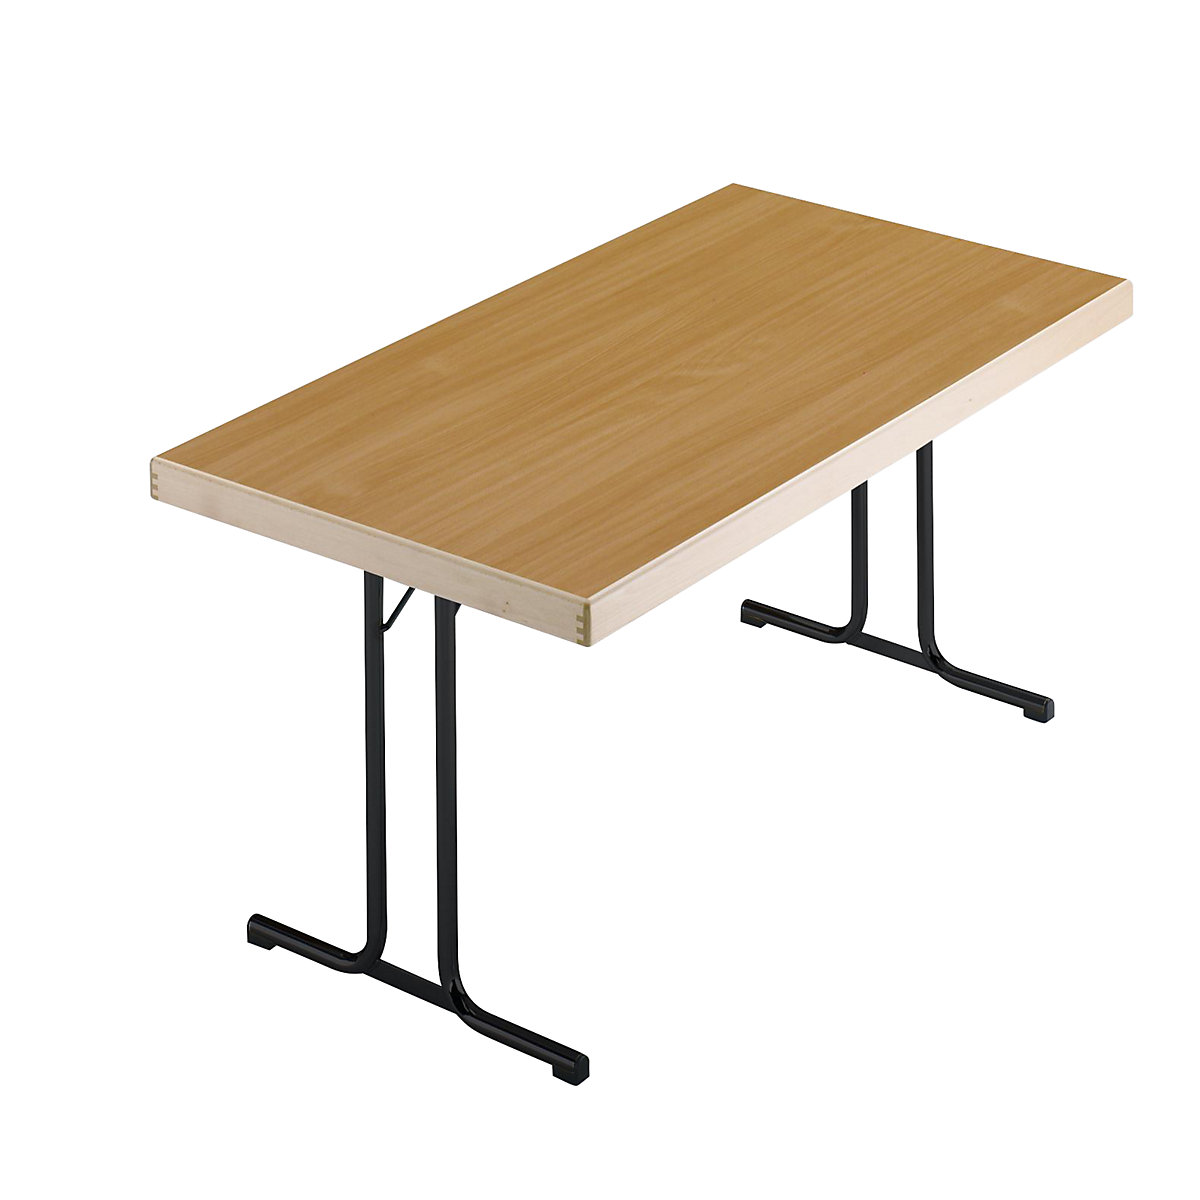 Folding table, double T-foot stand, 1200 x 800 mm, charcoal frame, beech finish tabletop-7